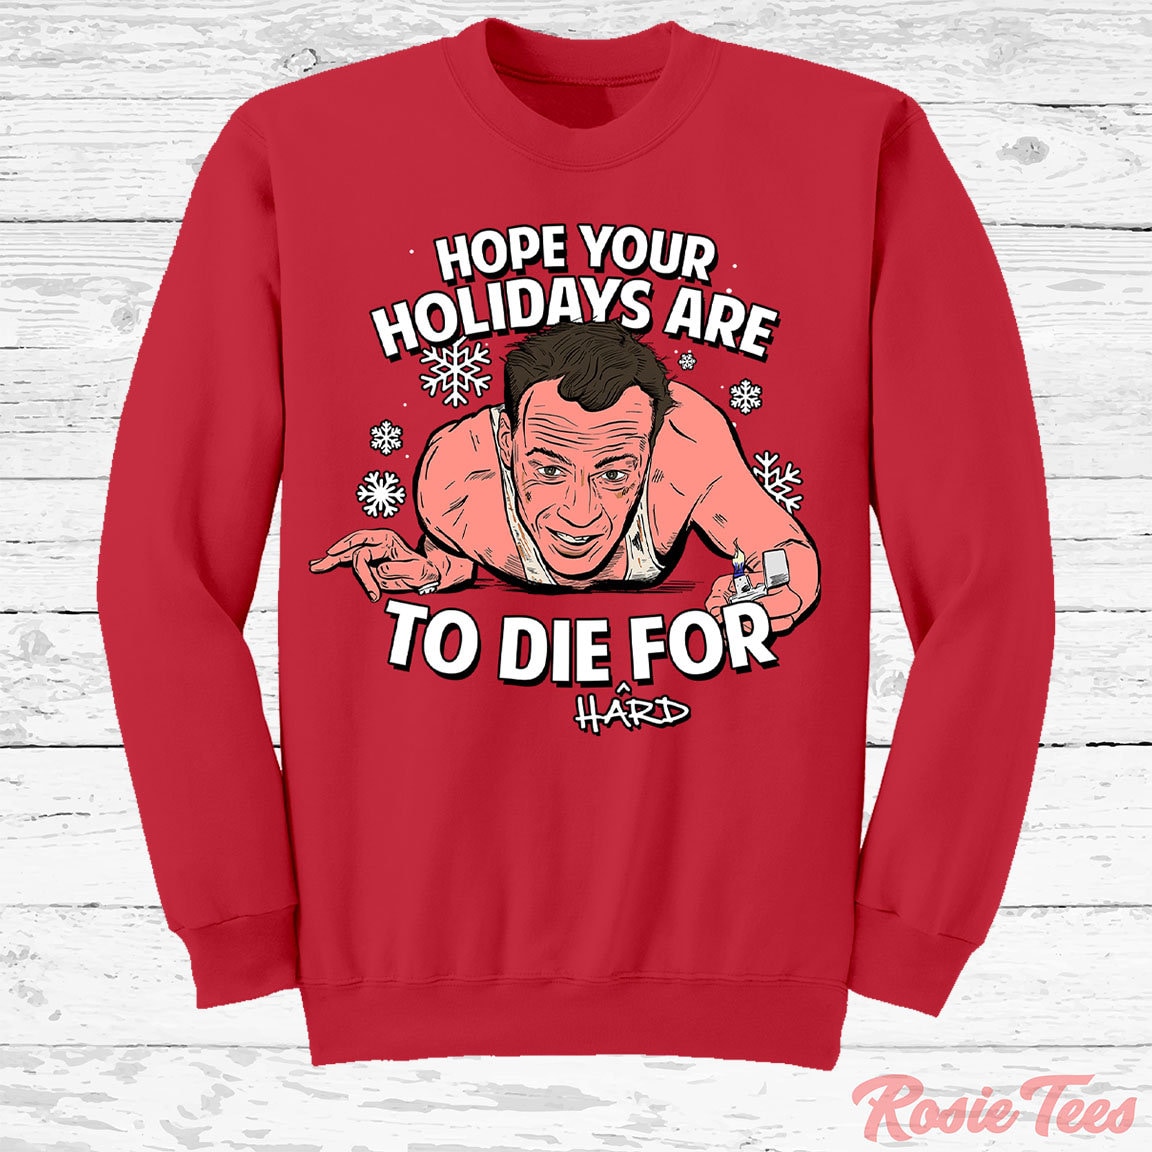 Hope Your Holidays Are To Die For Sweater | Christmas Movie Apparel Nakatomi Plaza Crewneck Sweatshirt Aktion Merchandise Rosie Tees von RosieTees